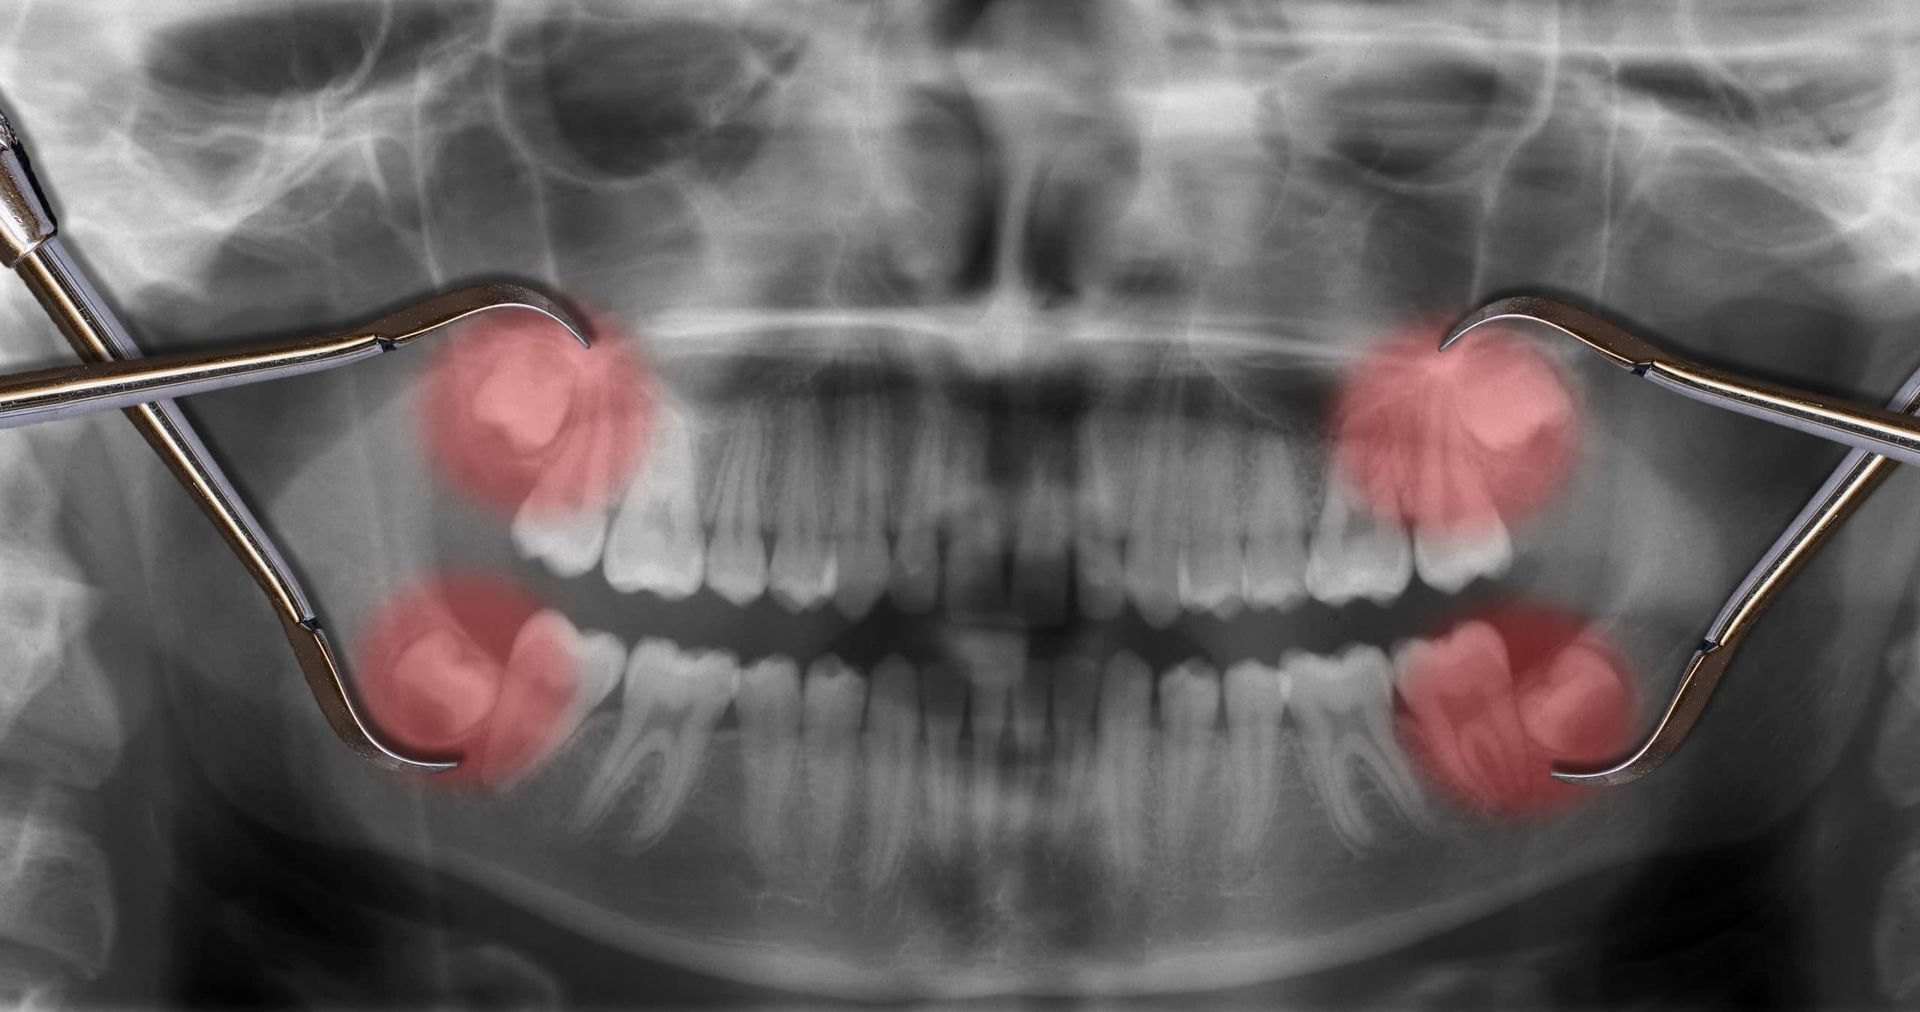 An x-ray of a person 's teeth with a toothache.